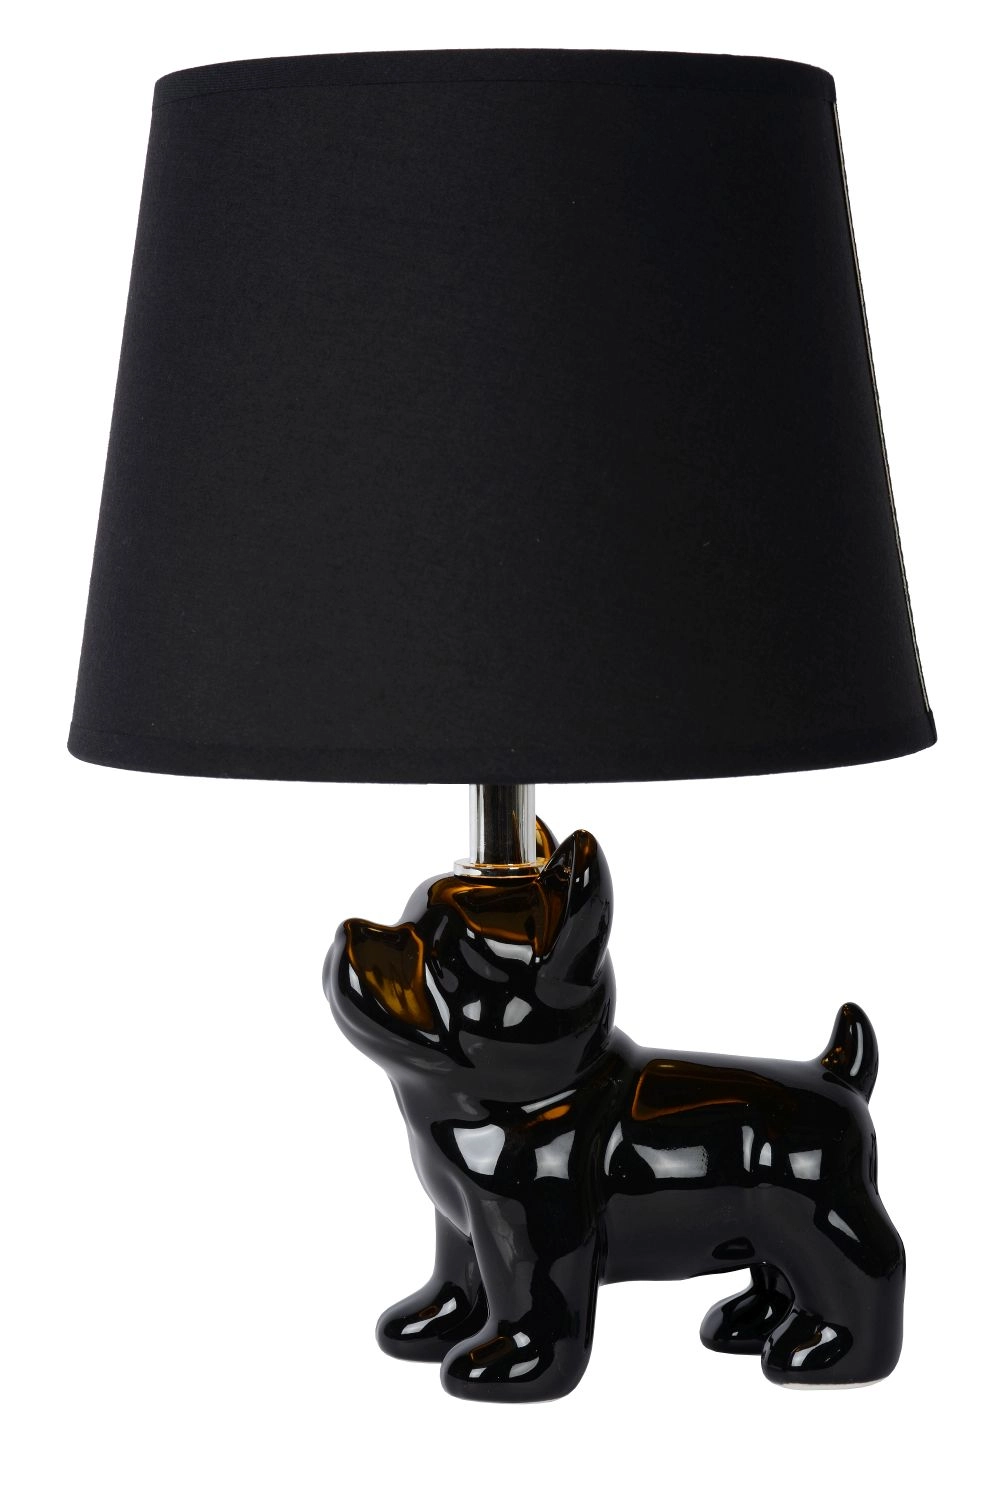 LU 13533/81/30 Lucide EXTRAVAGANZA SIR WINSTON - Table lamp - 1xE14 - Black